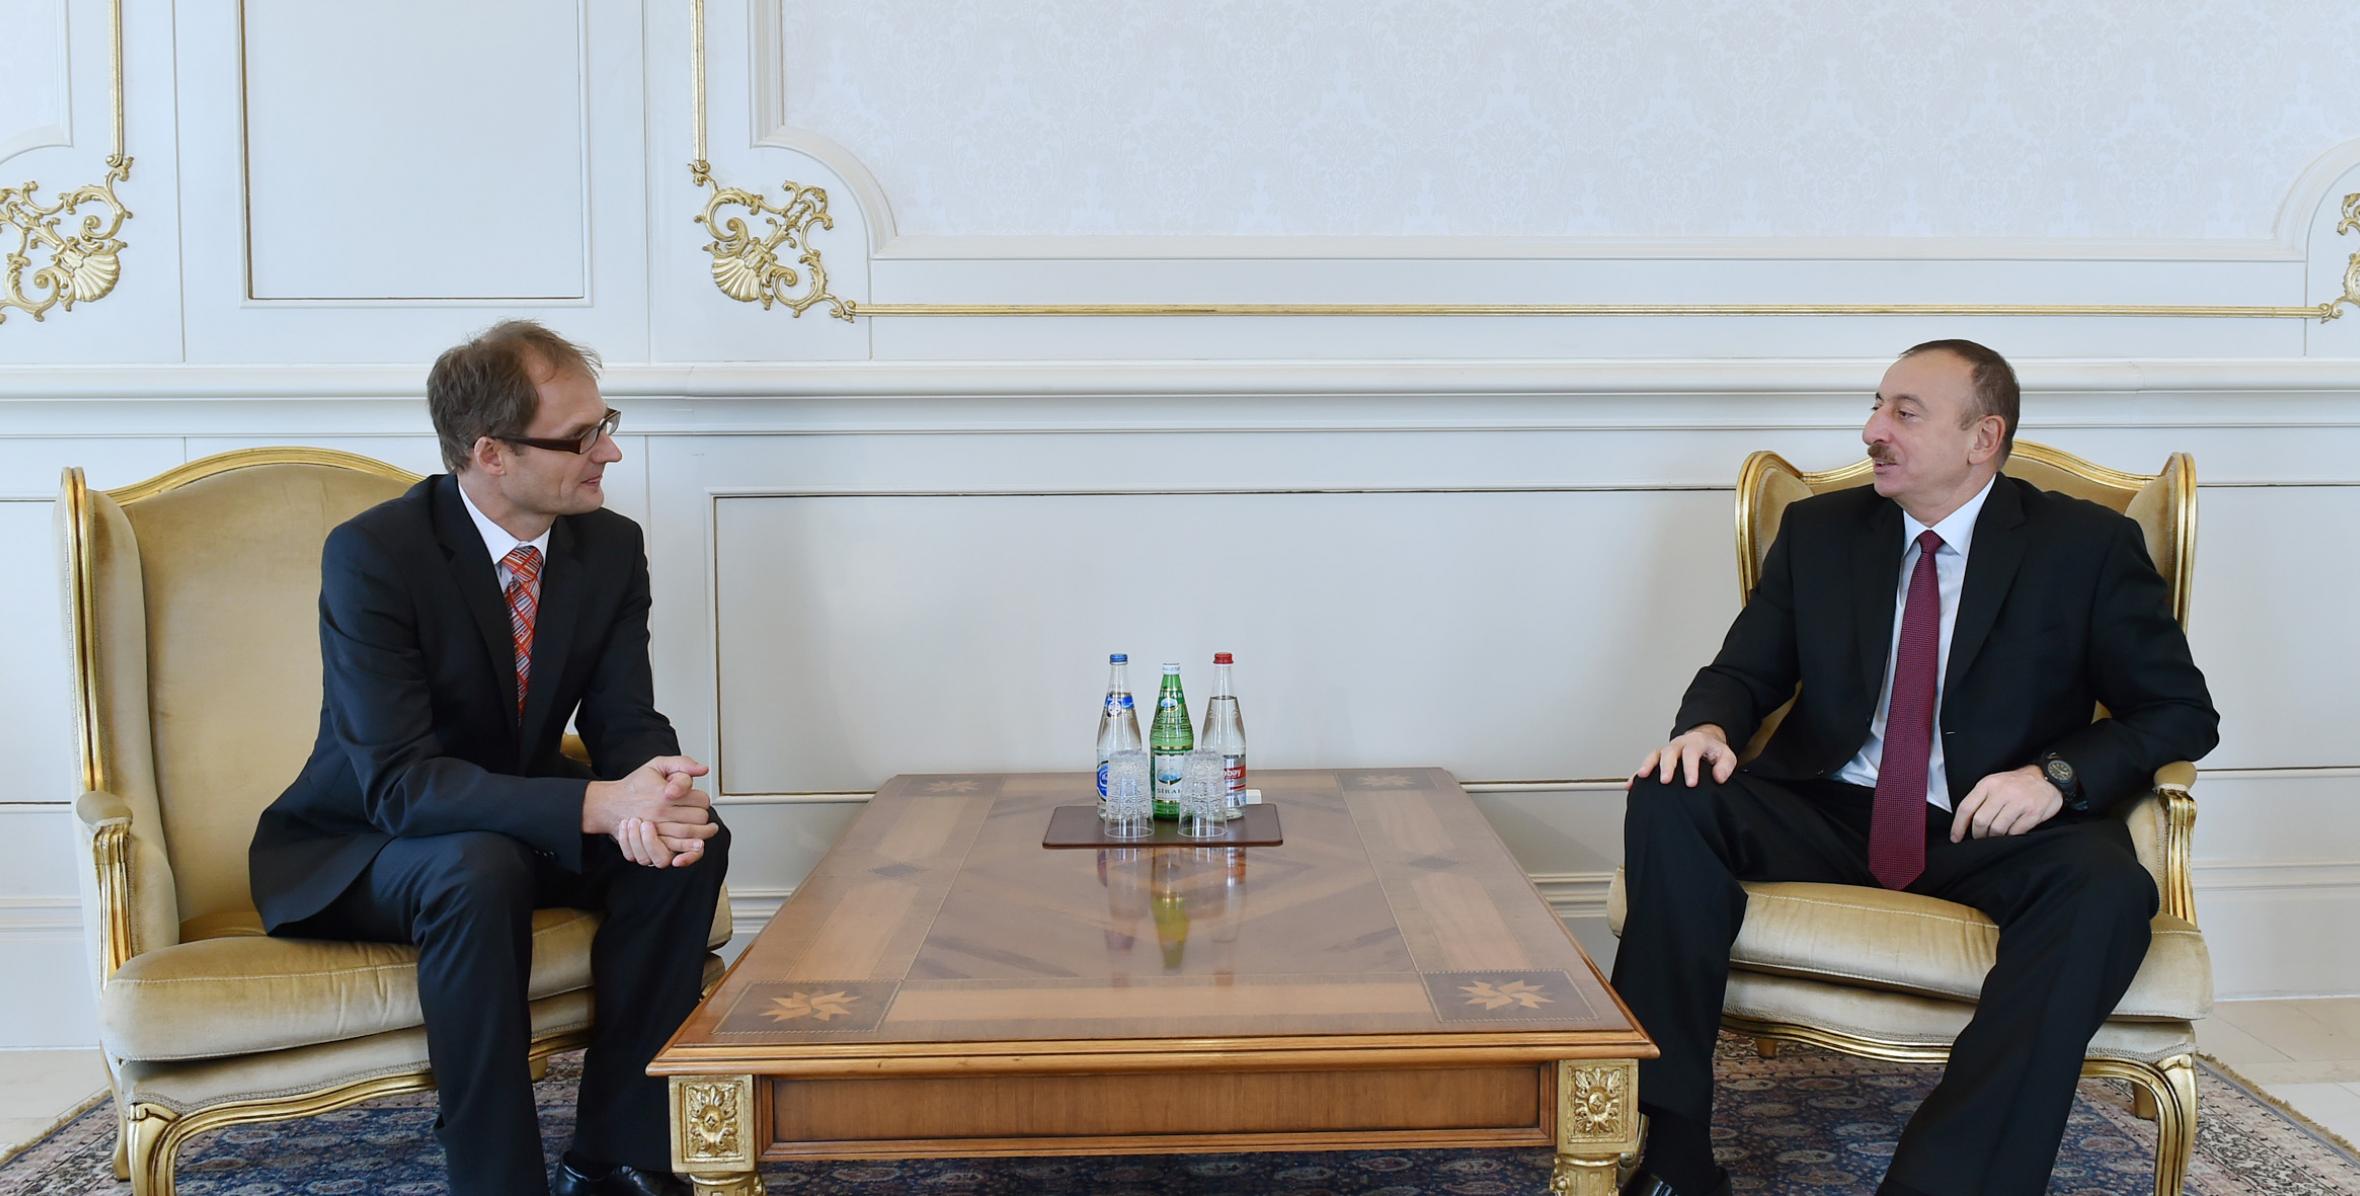 Ilham Aliyev accepted the credentials of the newly-appointed Swiss Ambassador